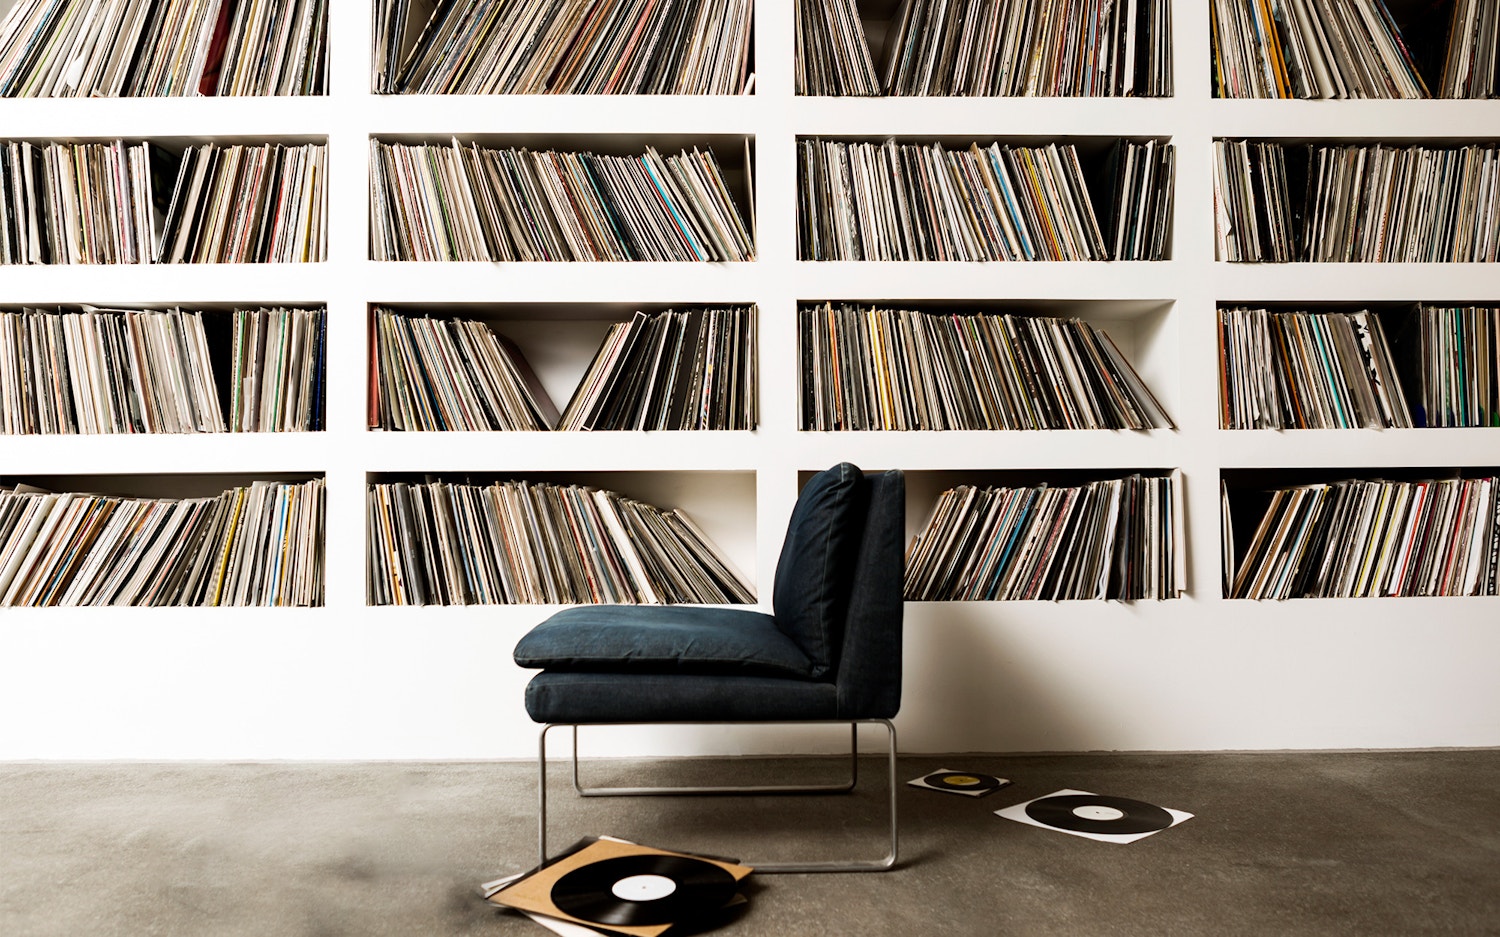 Chair in front of record collection